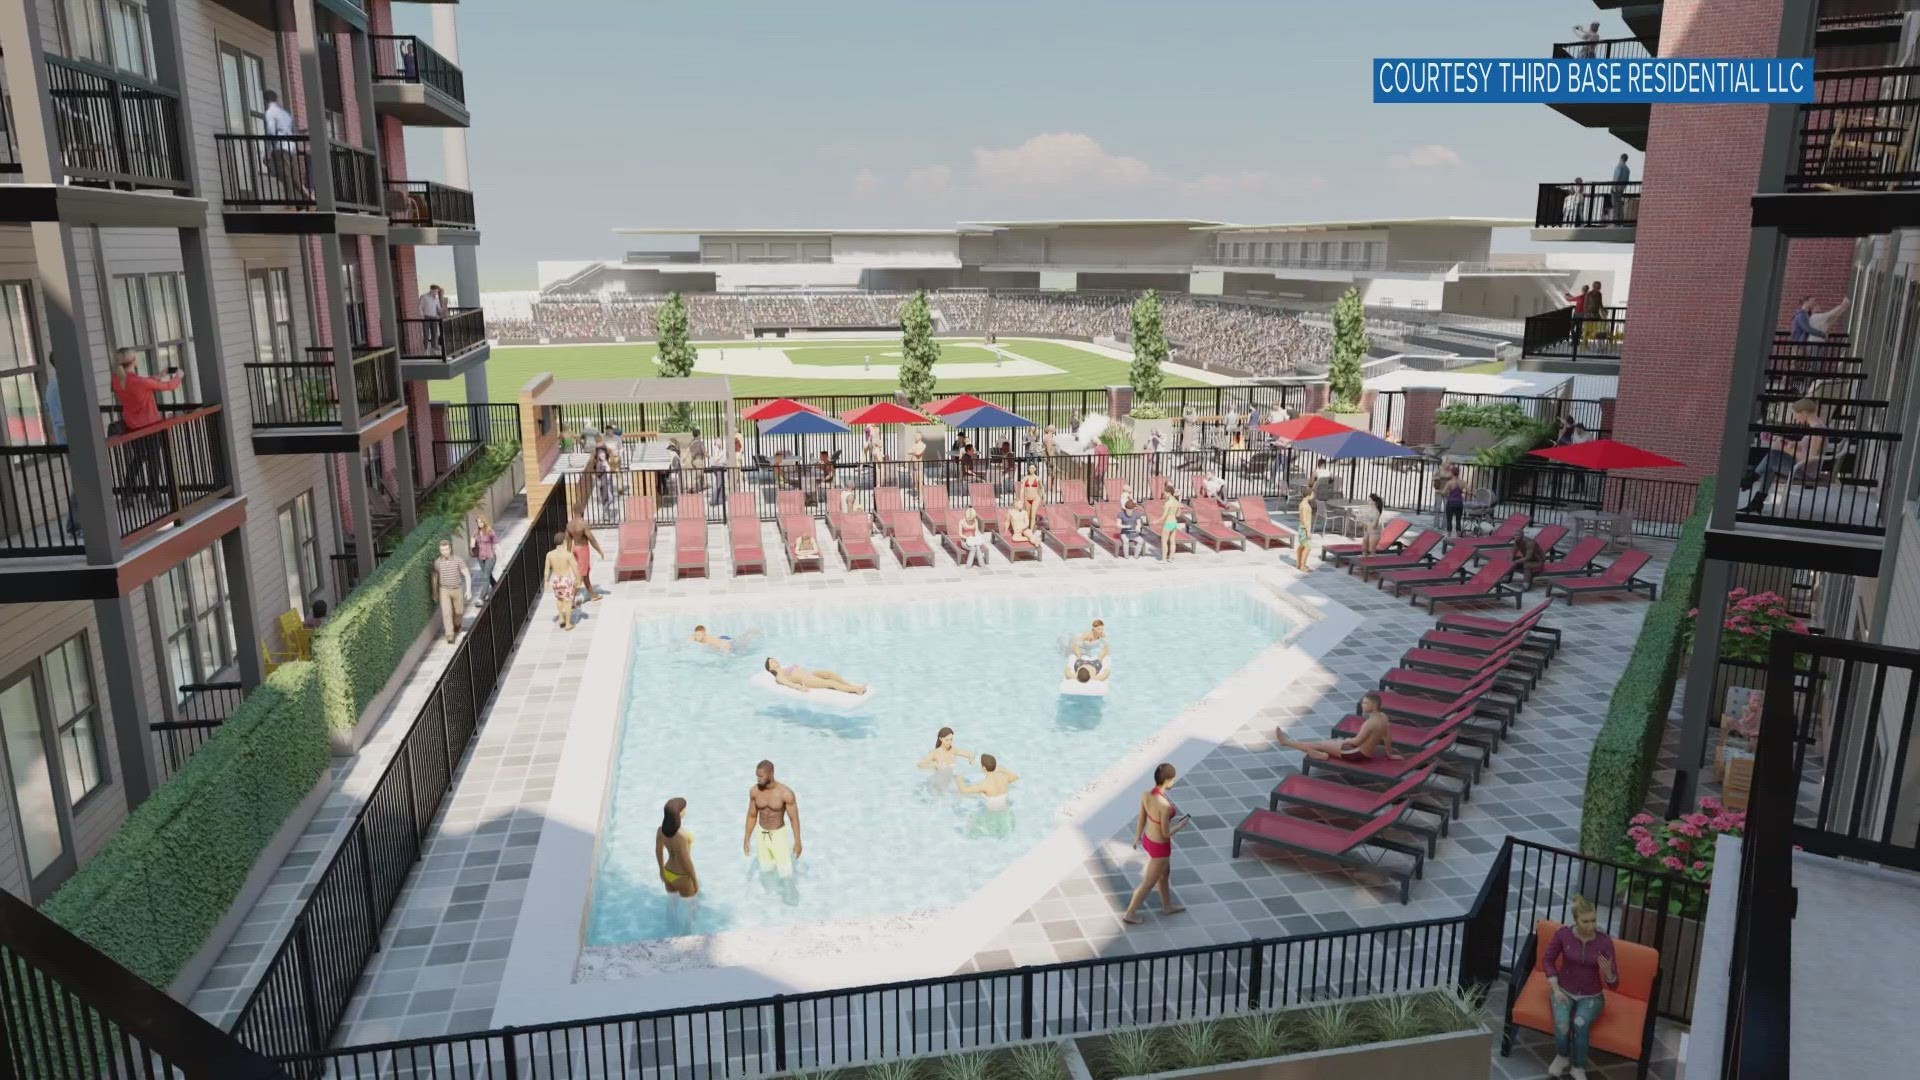 The Yardley Flats apartment complex project is $70 million compared to the $114 million for the stadium. It is believed it will bring economic growth to the city.